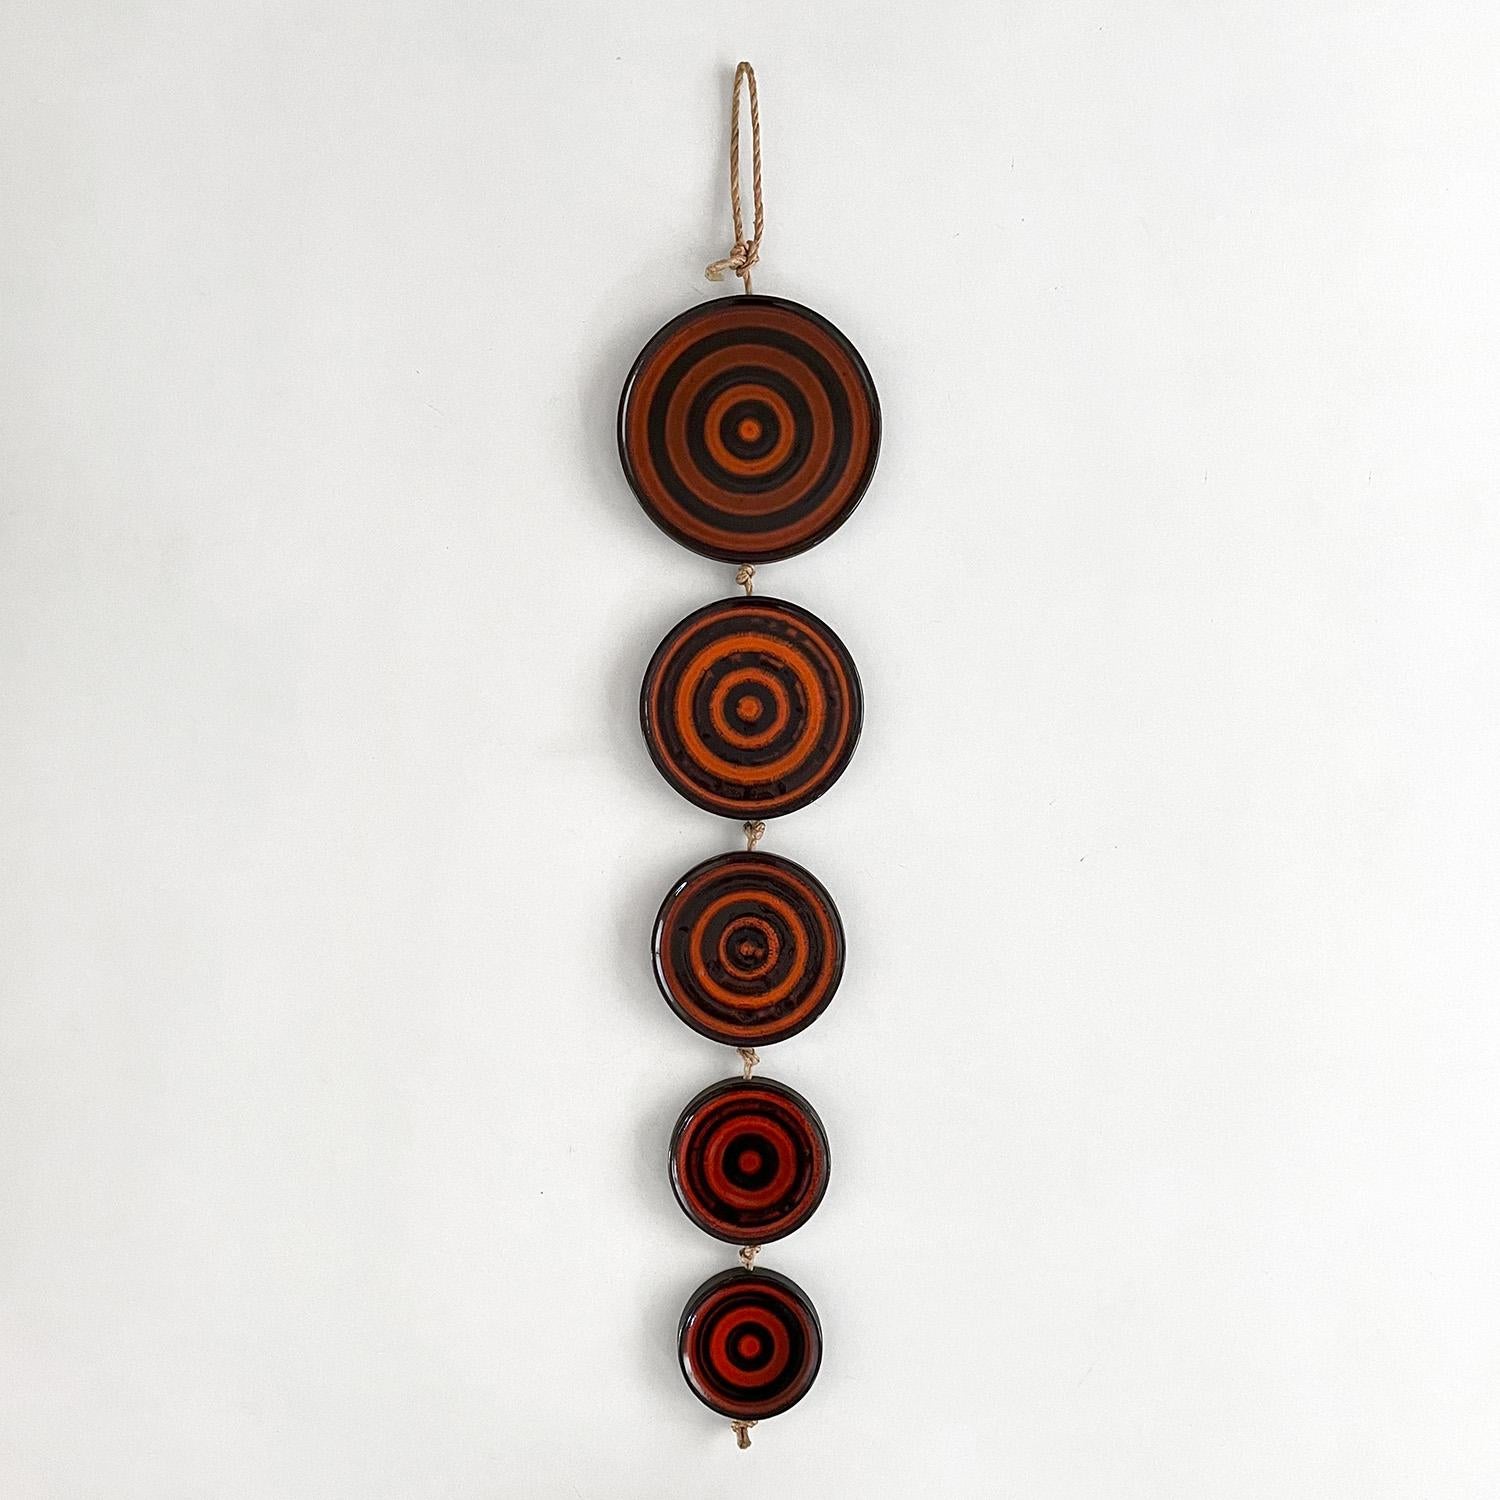 Ceramic disc wall sculpture
Germany, circa 1960’s
Five unique ceramic discs with concentric rings
Bold and contrasting color palette ranging from deep reds to burnt orange against stark black
Original rope cording with light surface markings
Patina